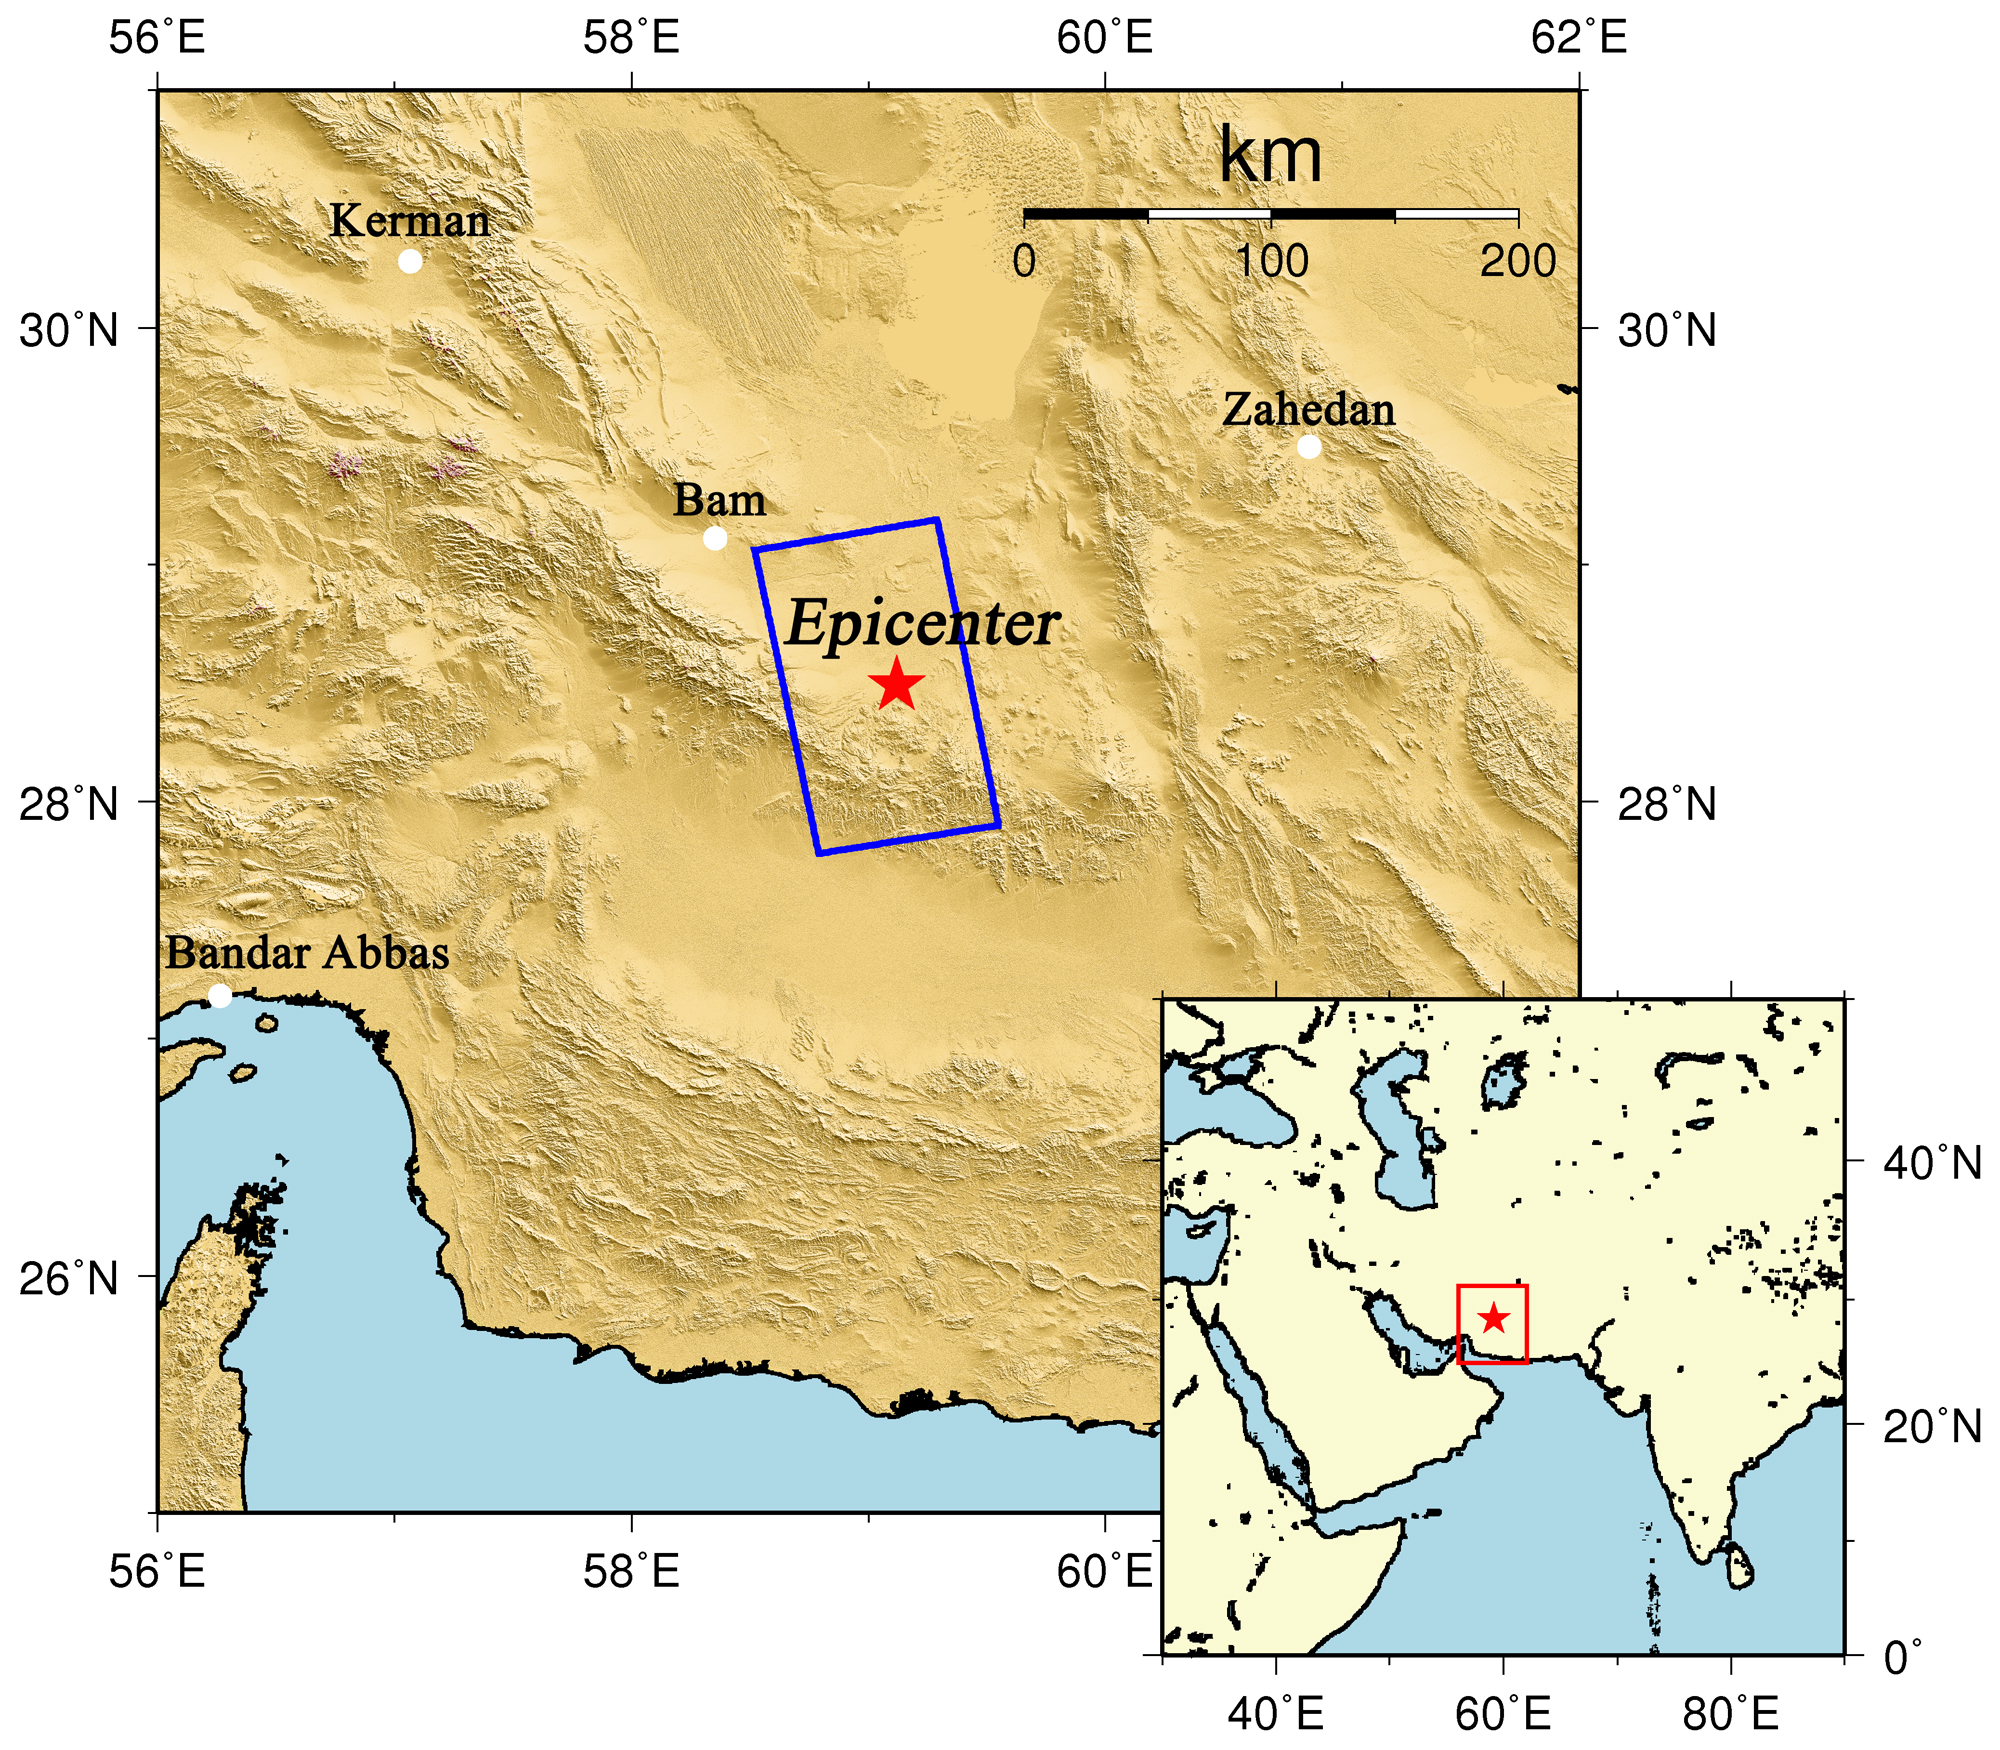 Fig.1: An overall view of the observation area (We refer to SRTM3 as terrain data). The blue rectangle indicates the observation area shown in Fig. 2 and the red star represents the epicenter.